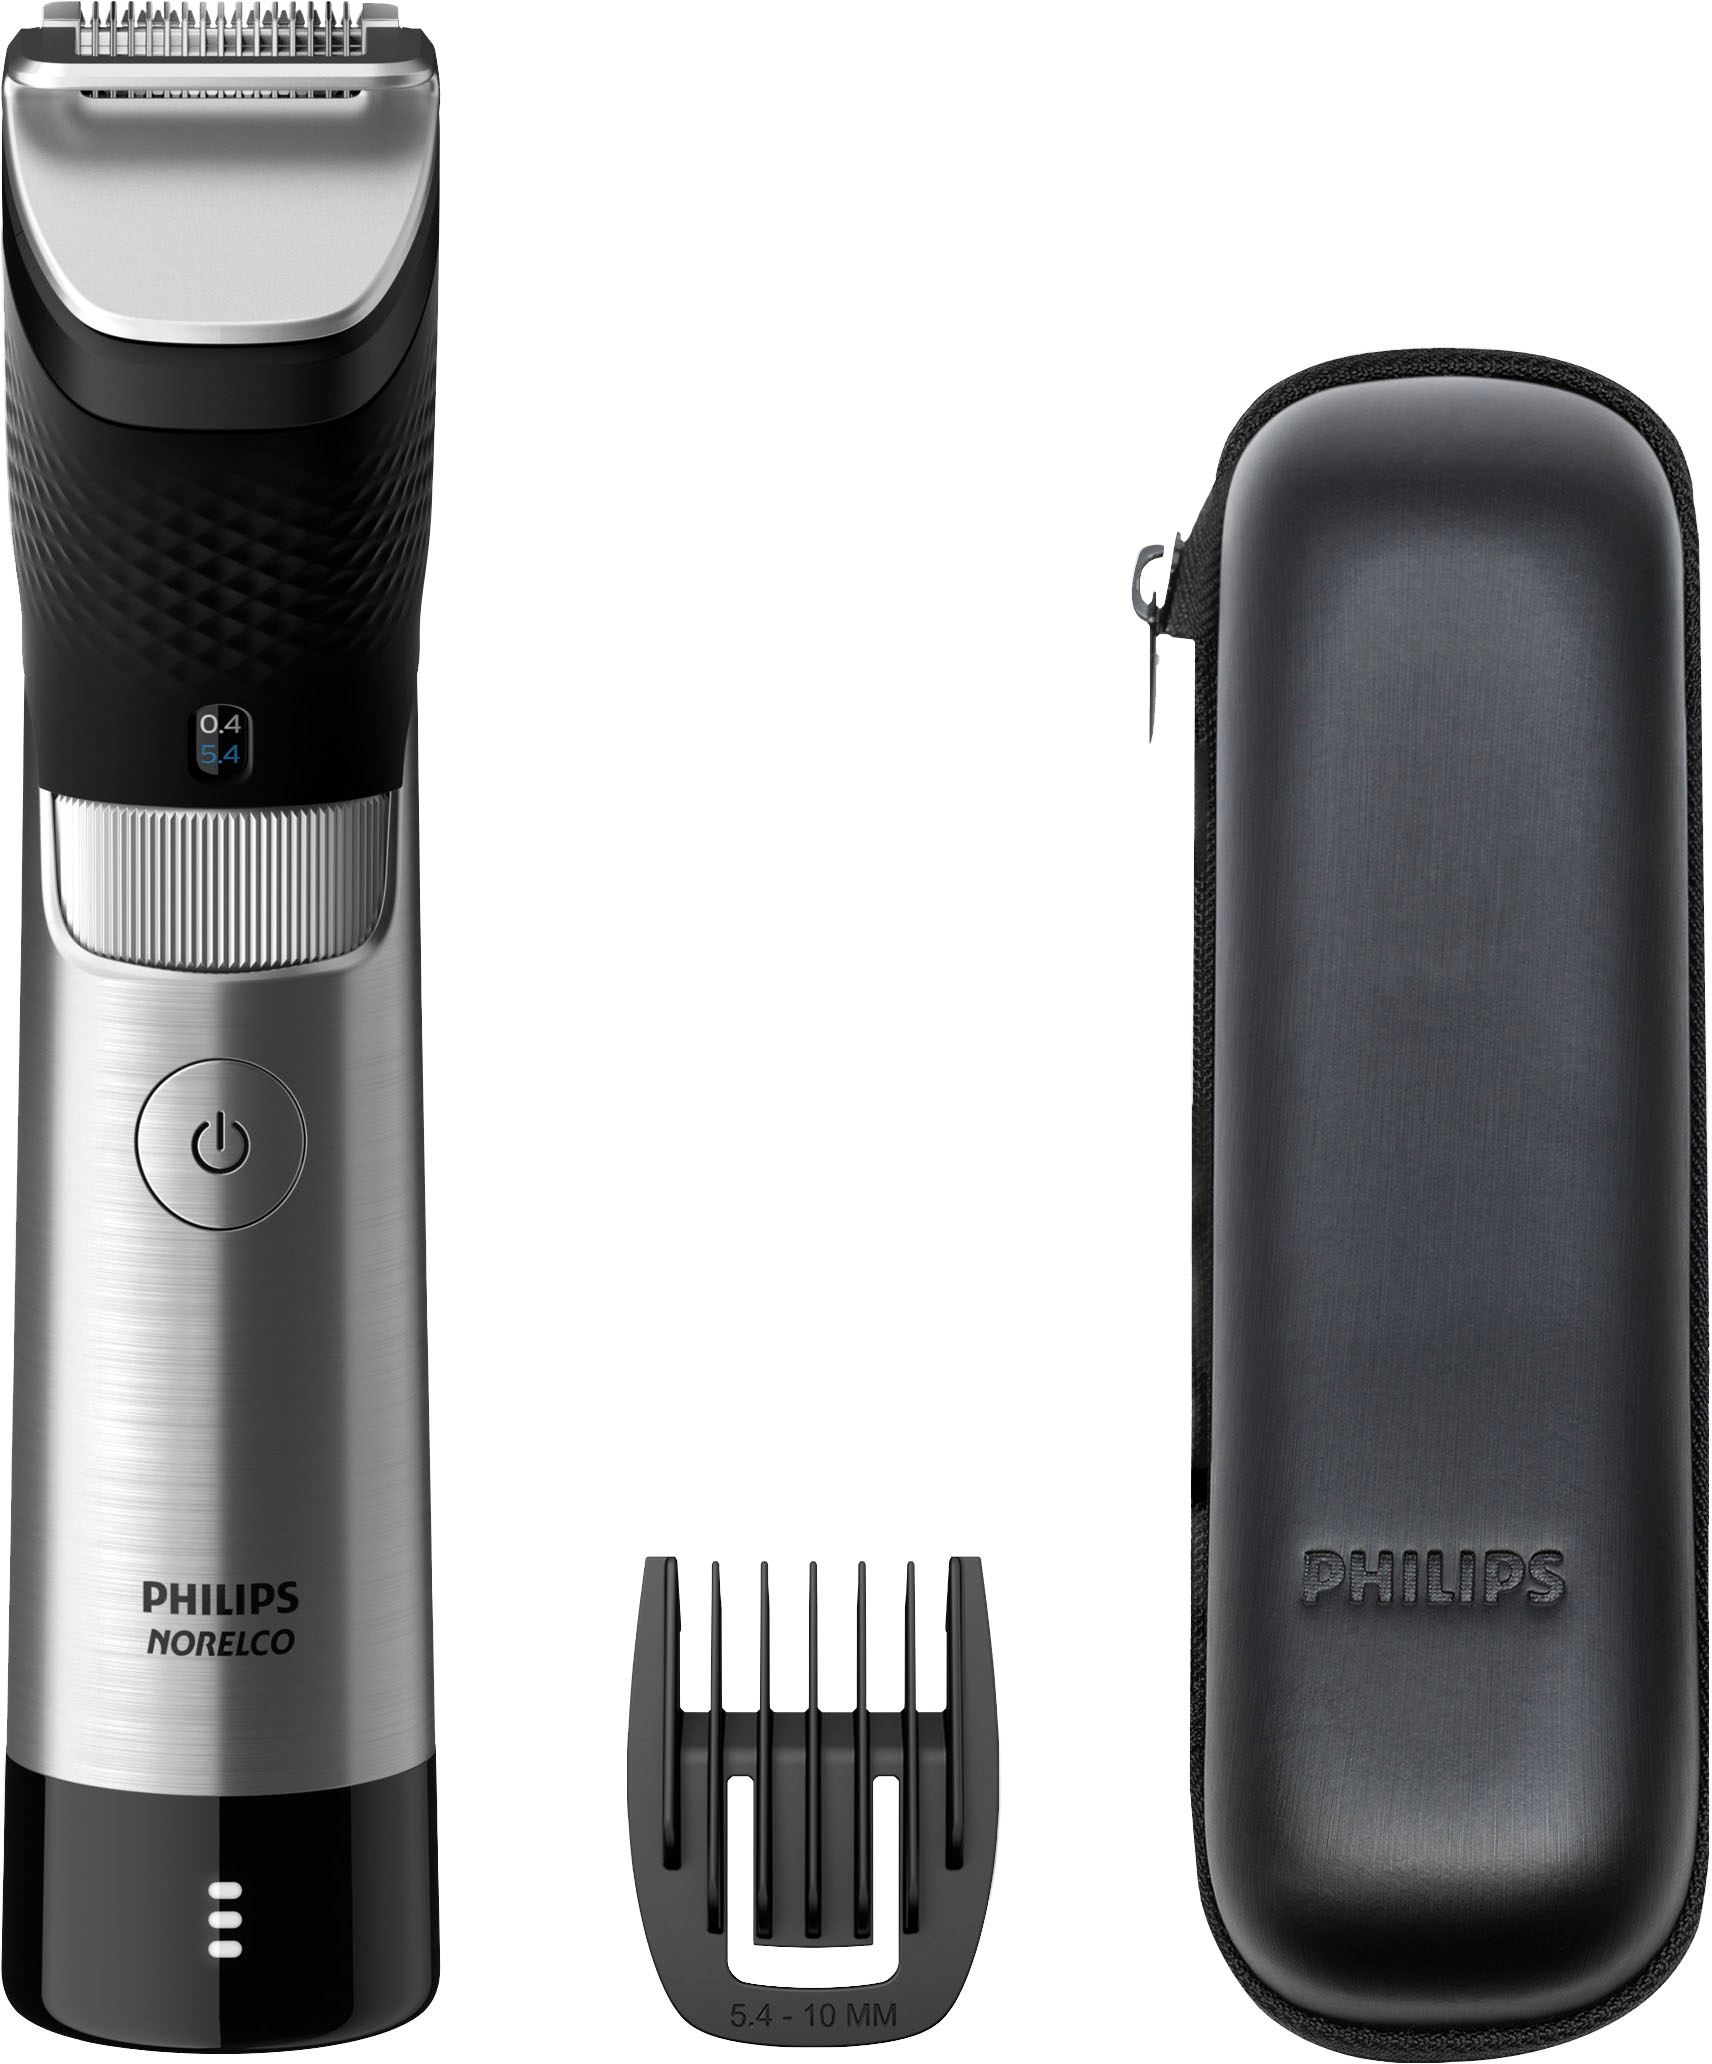 Philips Norelco vs. Wahl: Which Brand Sells the Better Beard Trimmer?